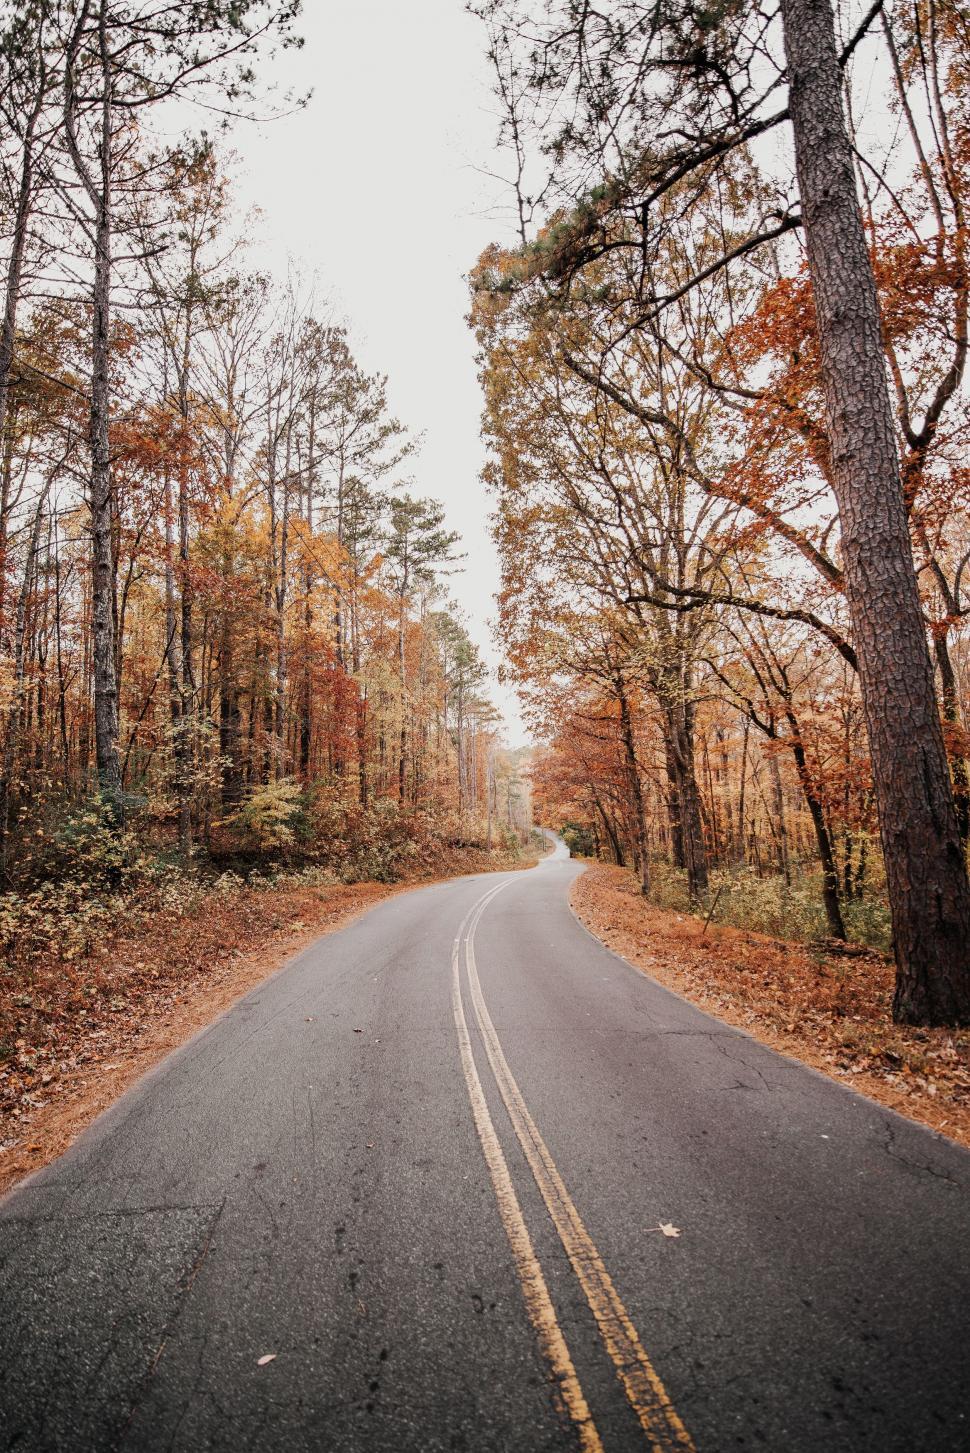 Free Image of Empty Road Cutting Through Forest 